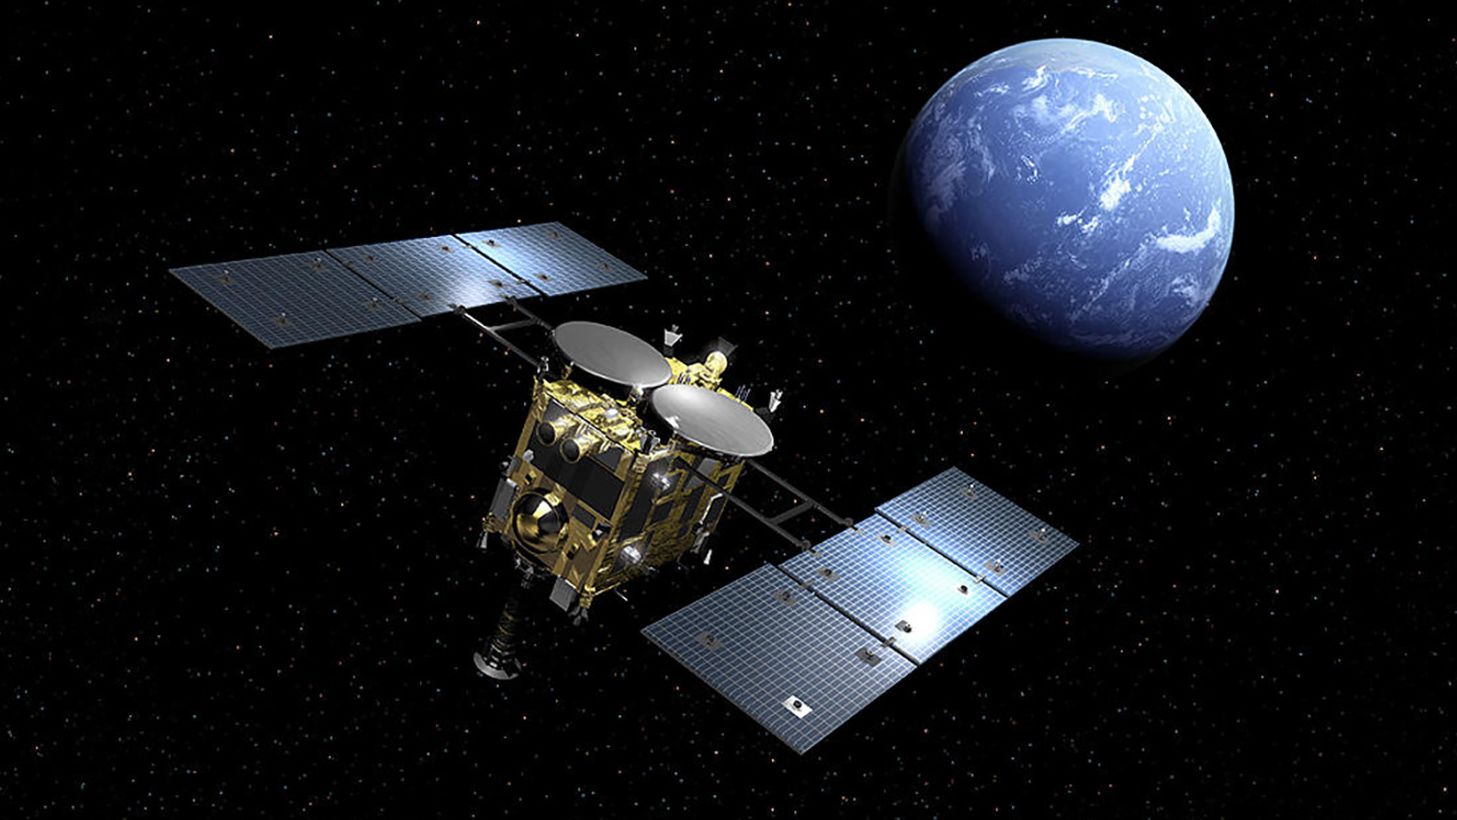 The Japanese spacecraft Hayabusa2 is expected to return to Earth by late 2020.